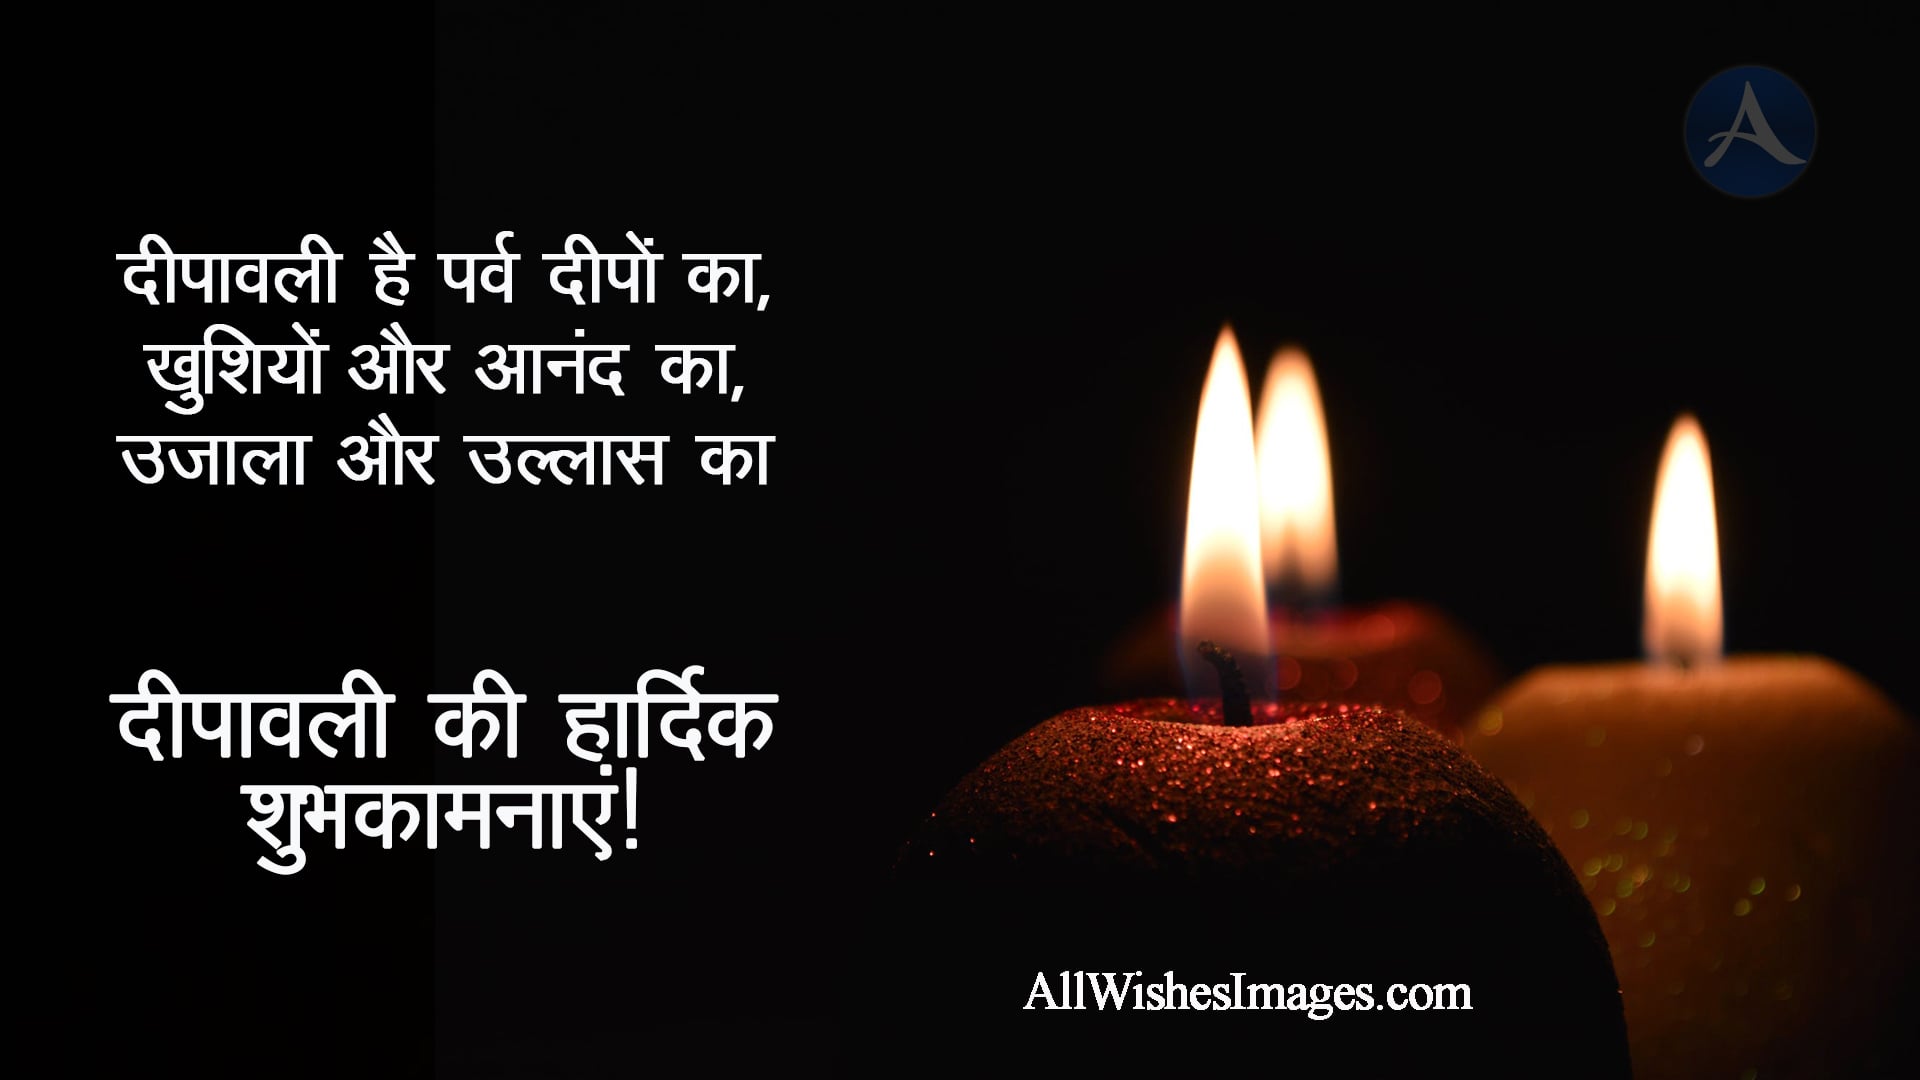 Wishing Happy Diwali Image Hindi - All Wishes Images - Images for WhatsApp